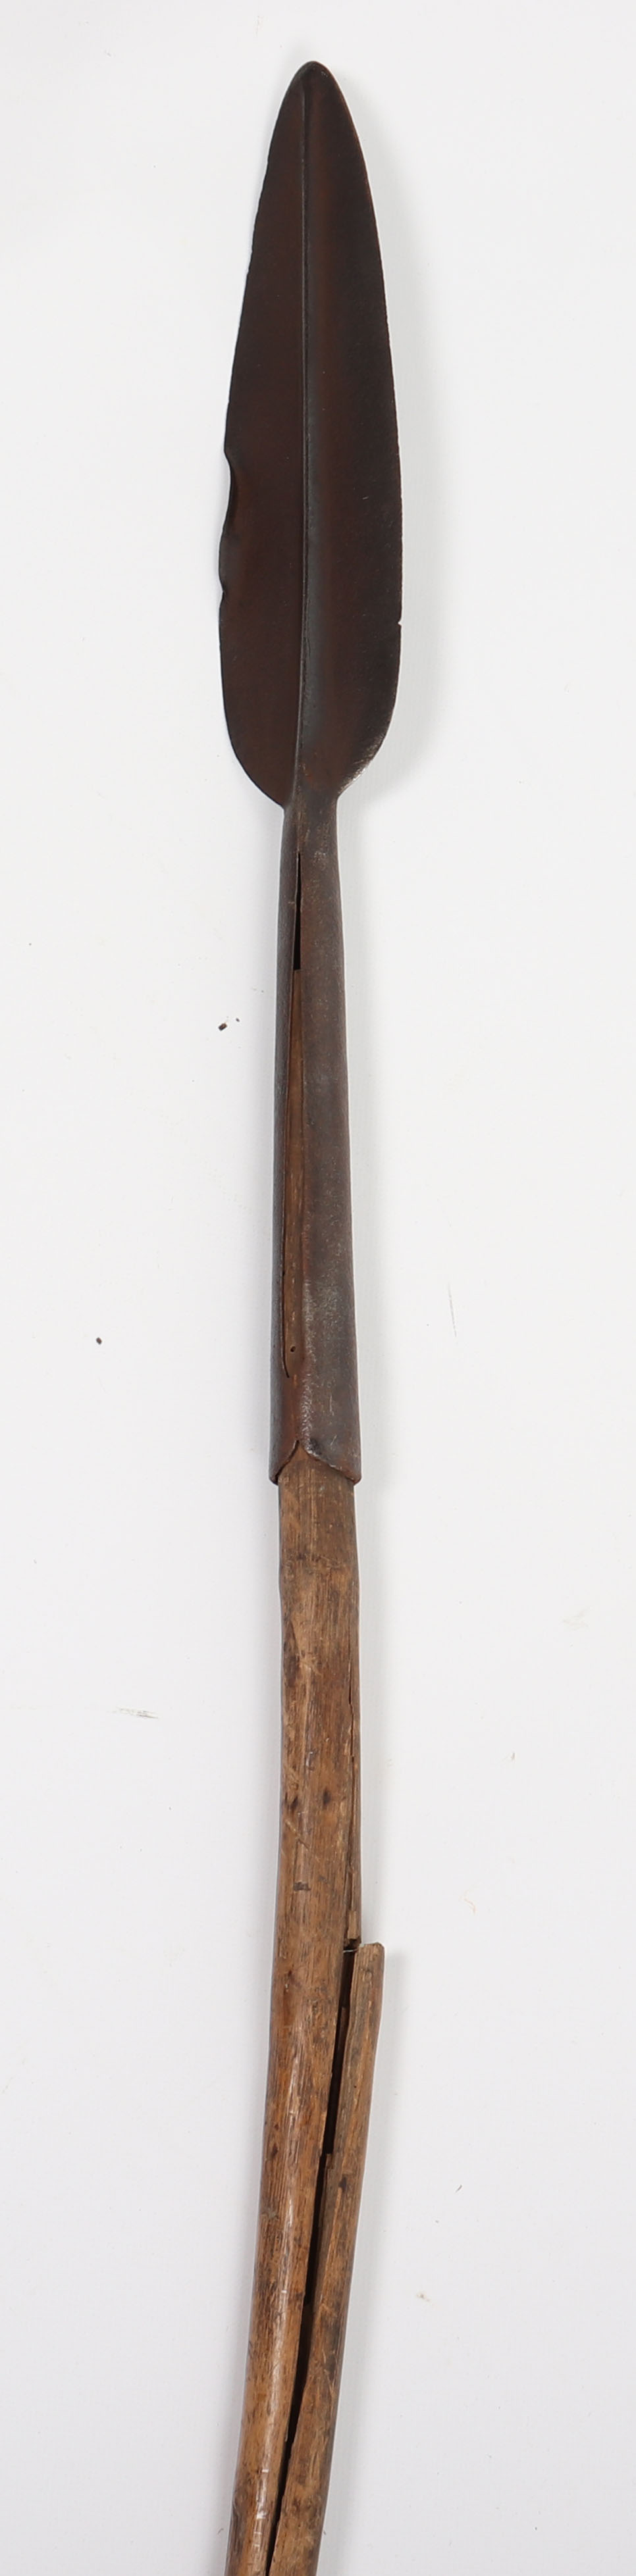 Almost Matched Pair of Sudanese Spears c.1880 - Image 8 of 18